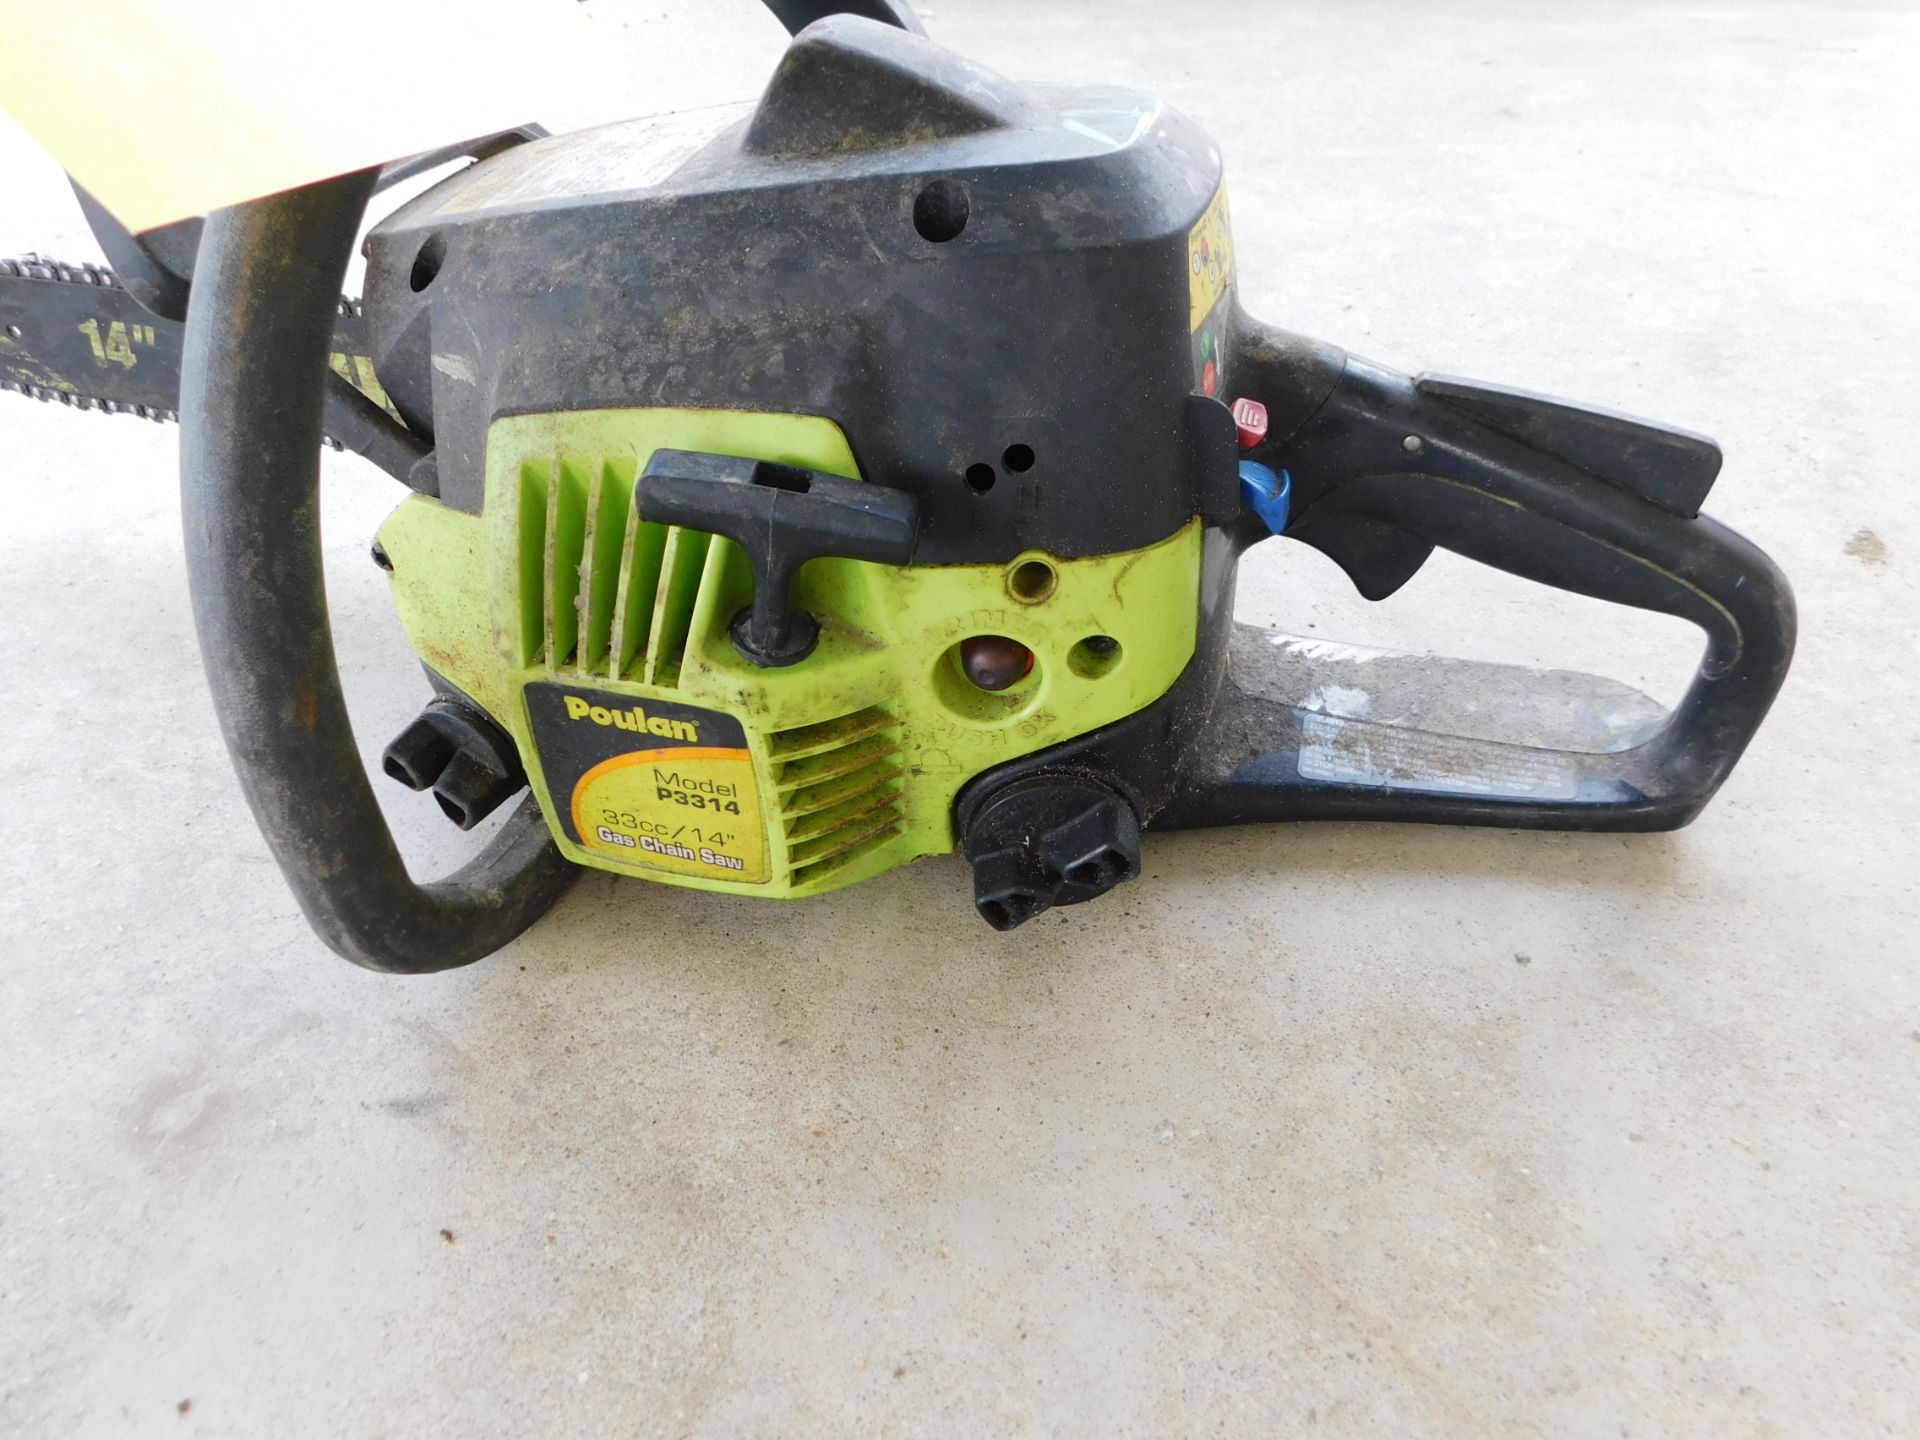 Poulan Model P3314 14" Gas-Powered Chain Saw-Runs, BUT Clutch is Sticking - Image 3 of 7